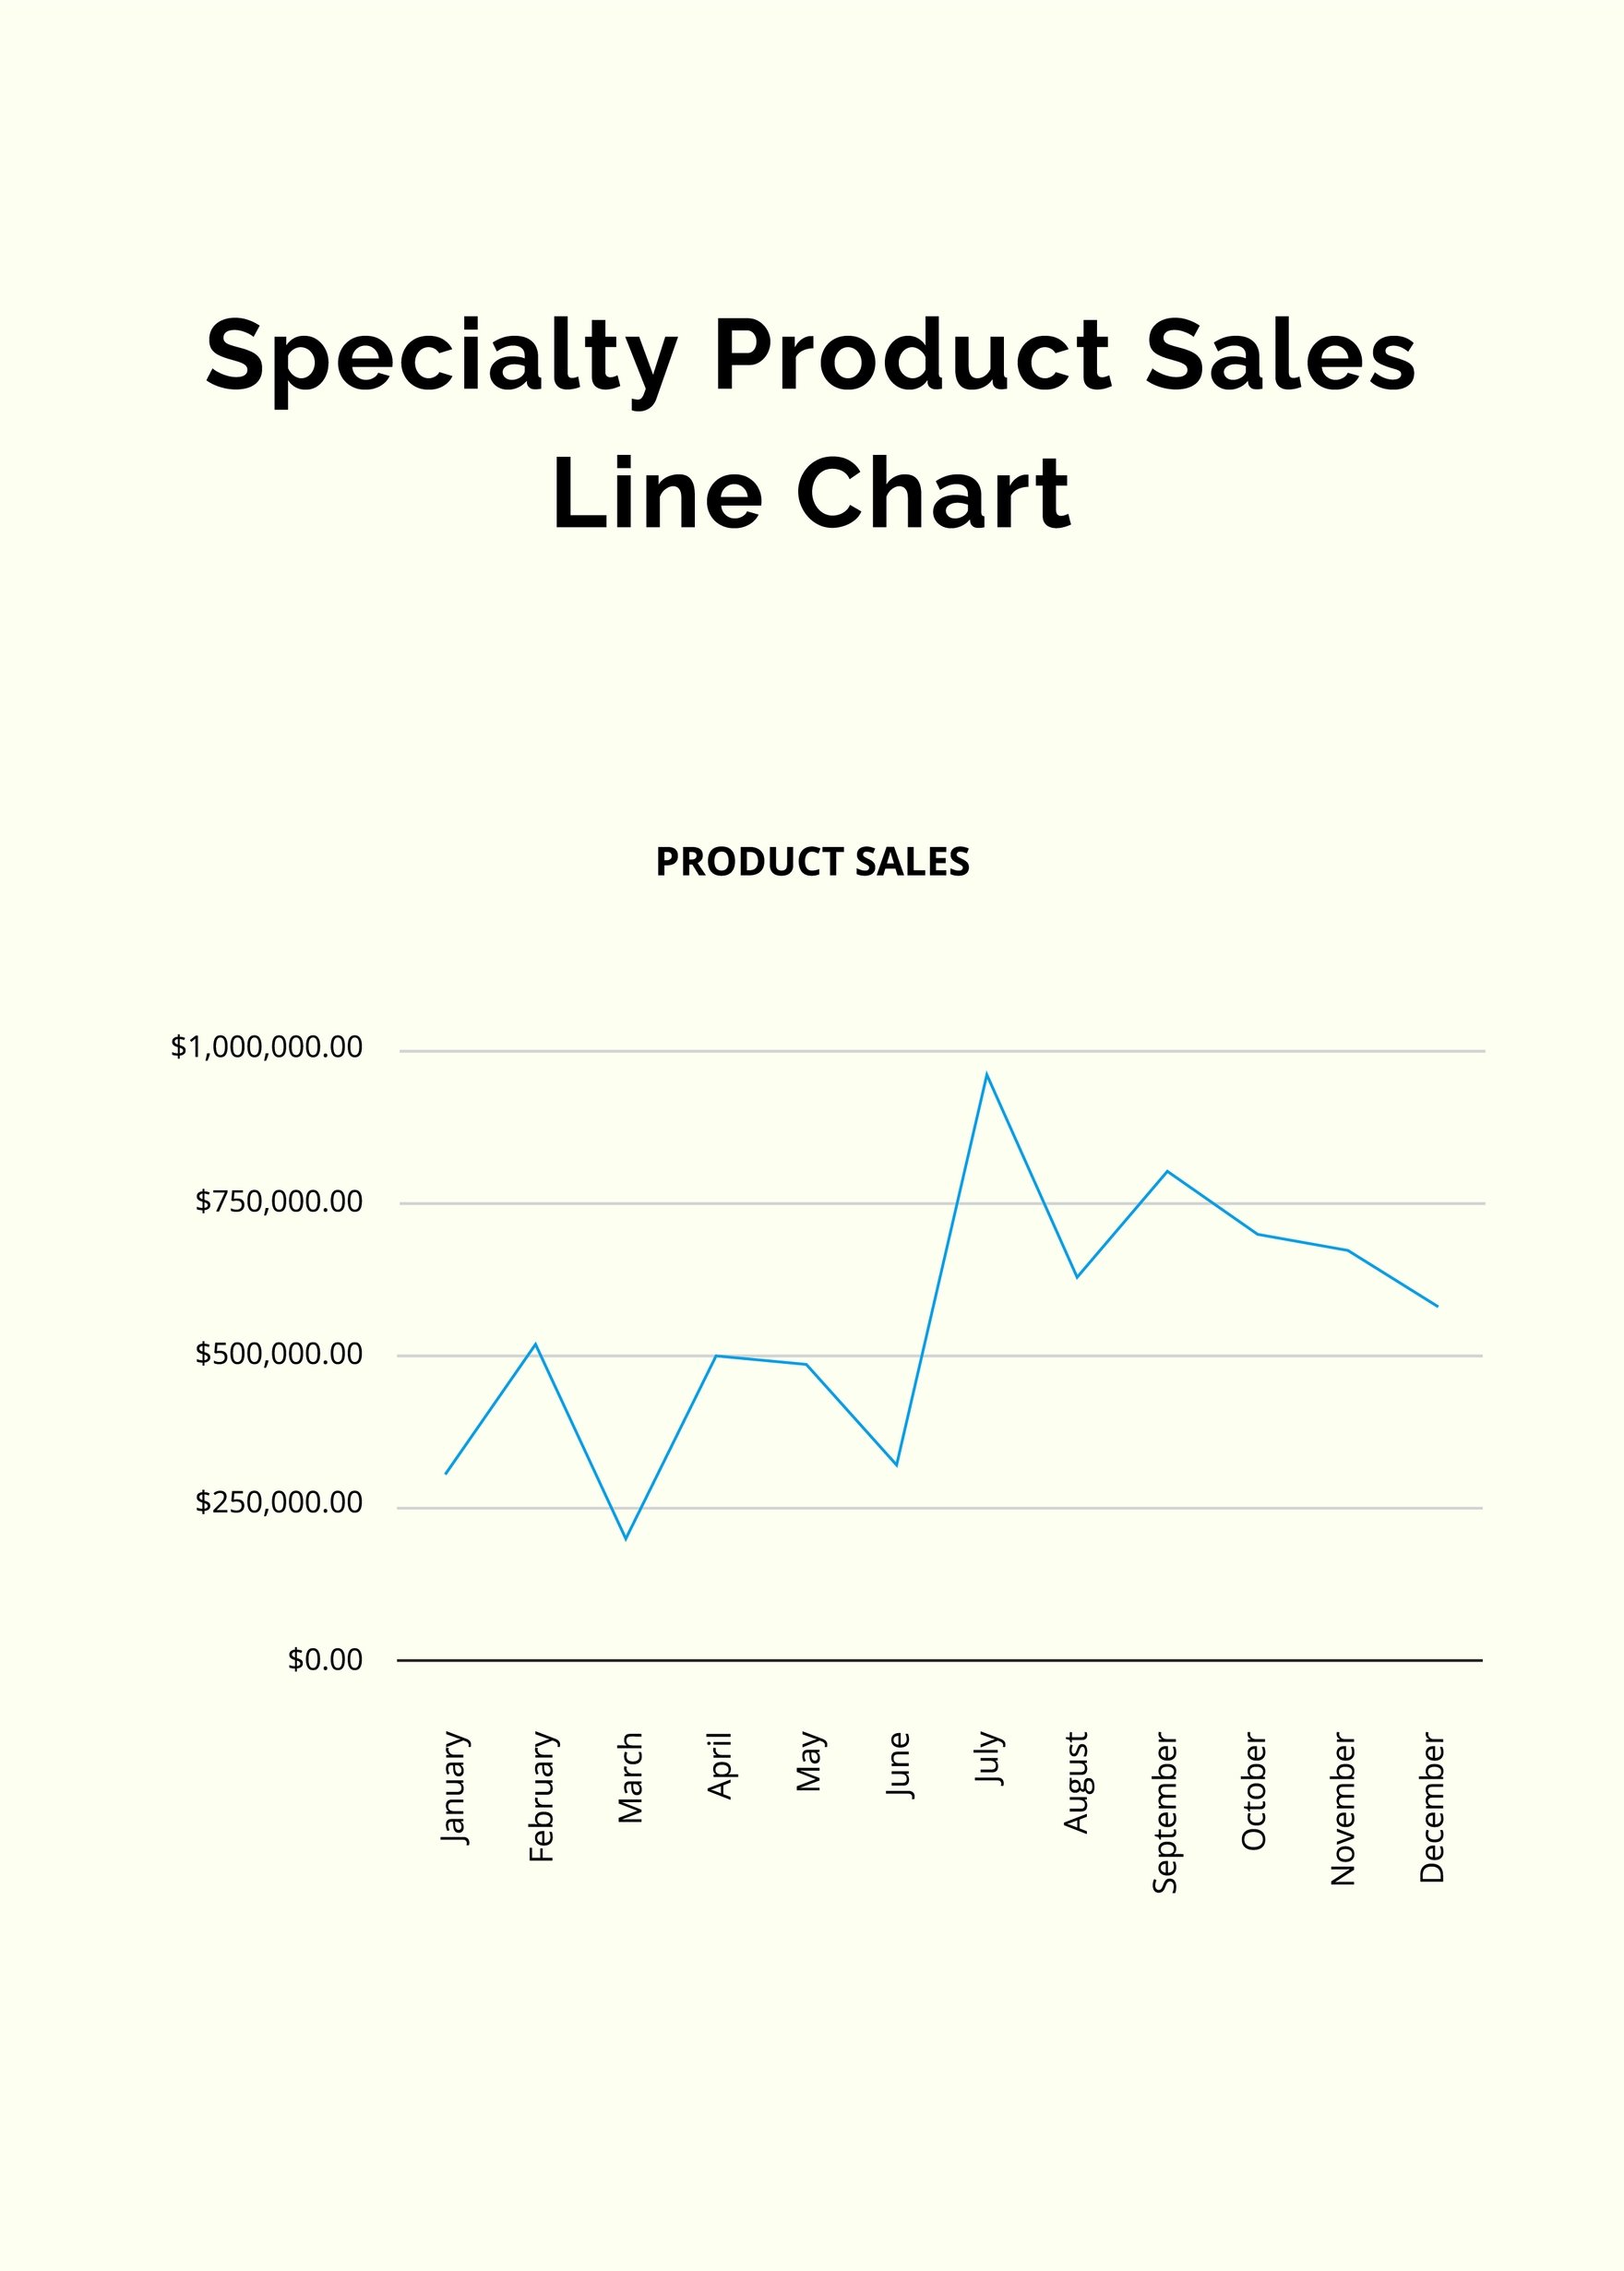 Specialty Product Sales Line Chart